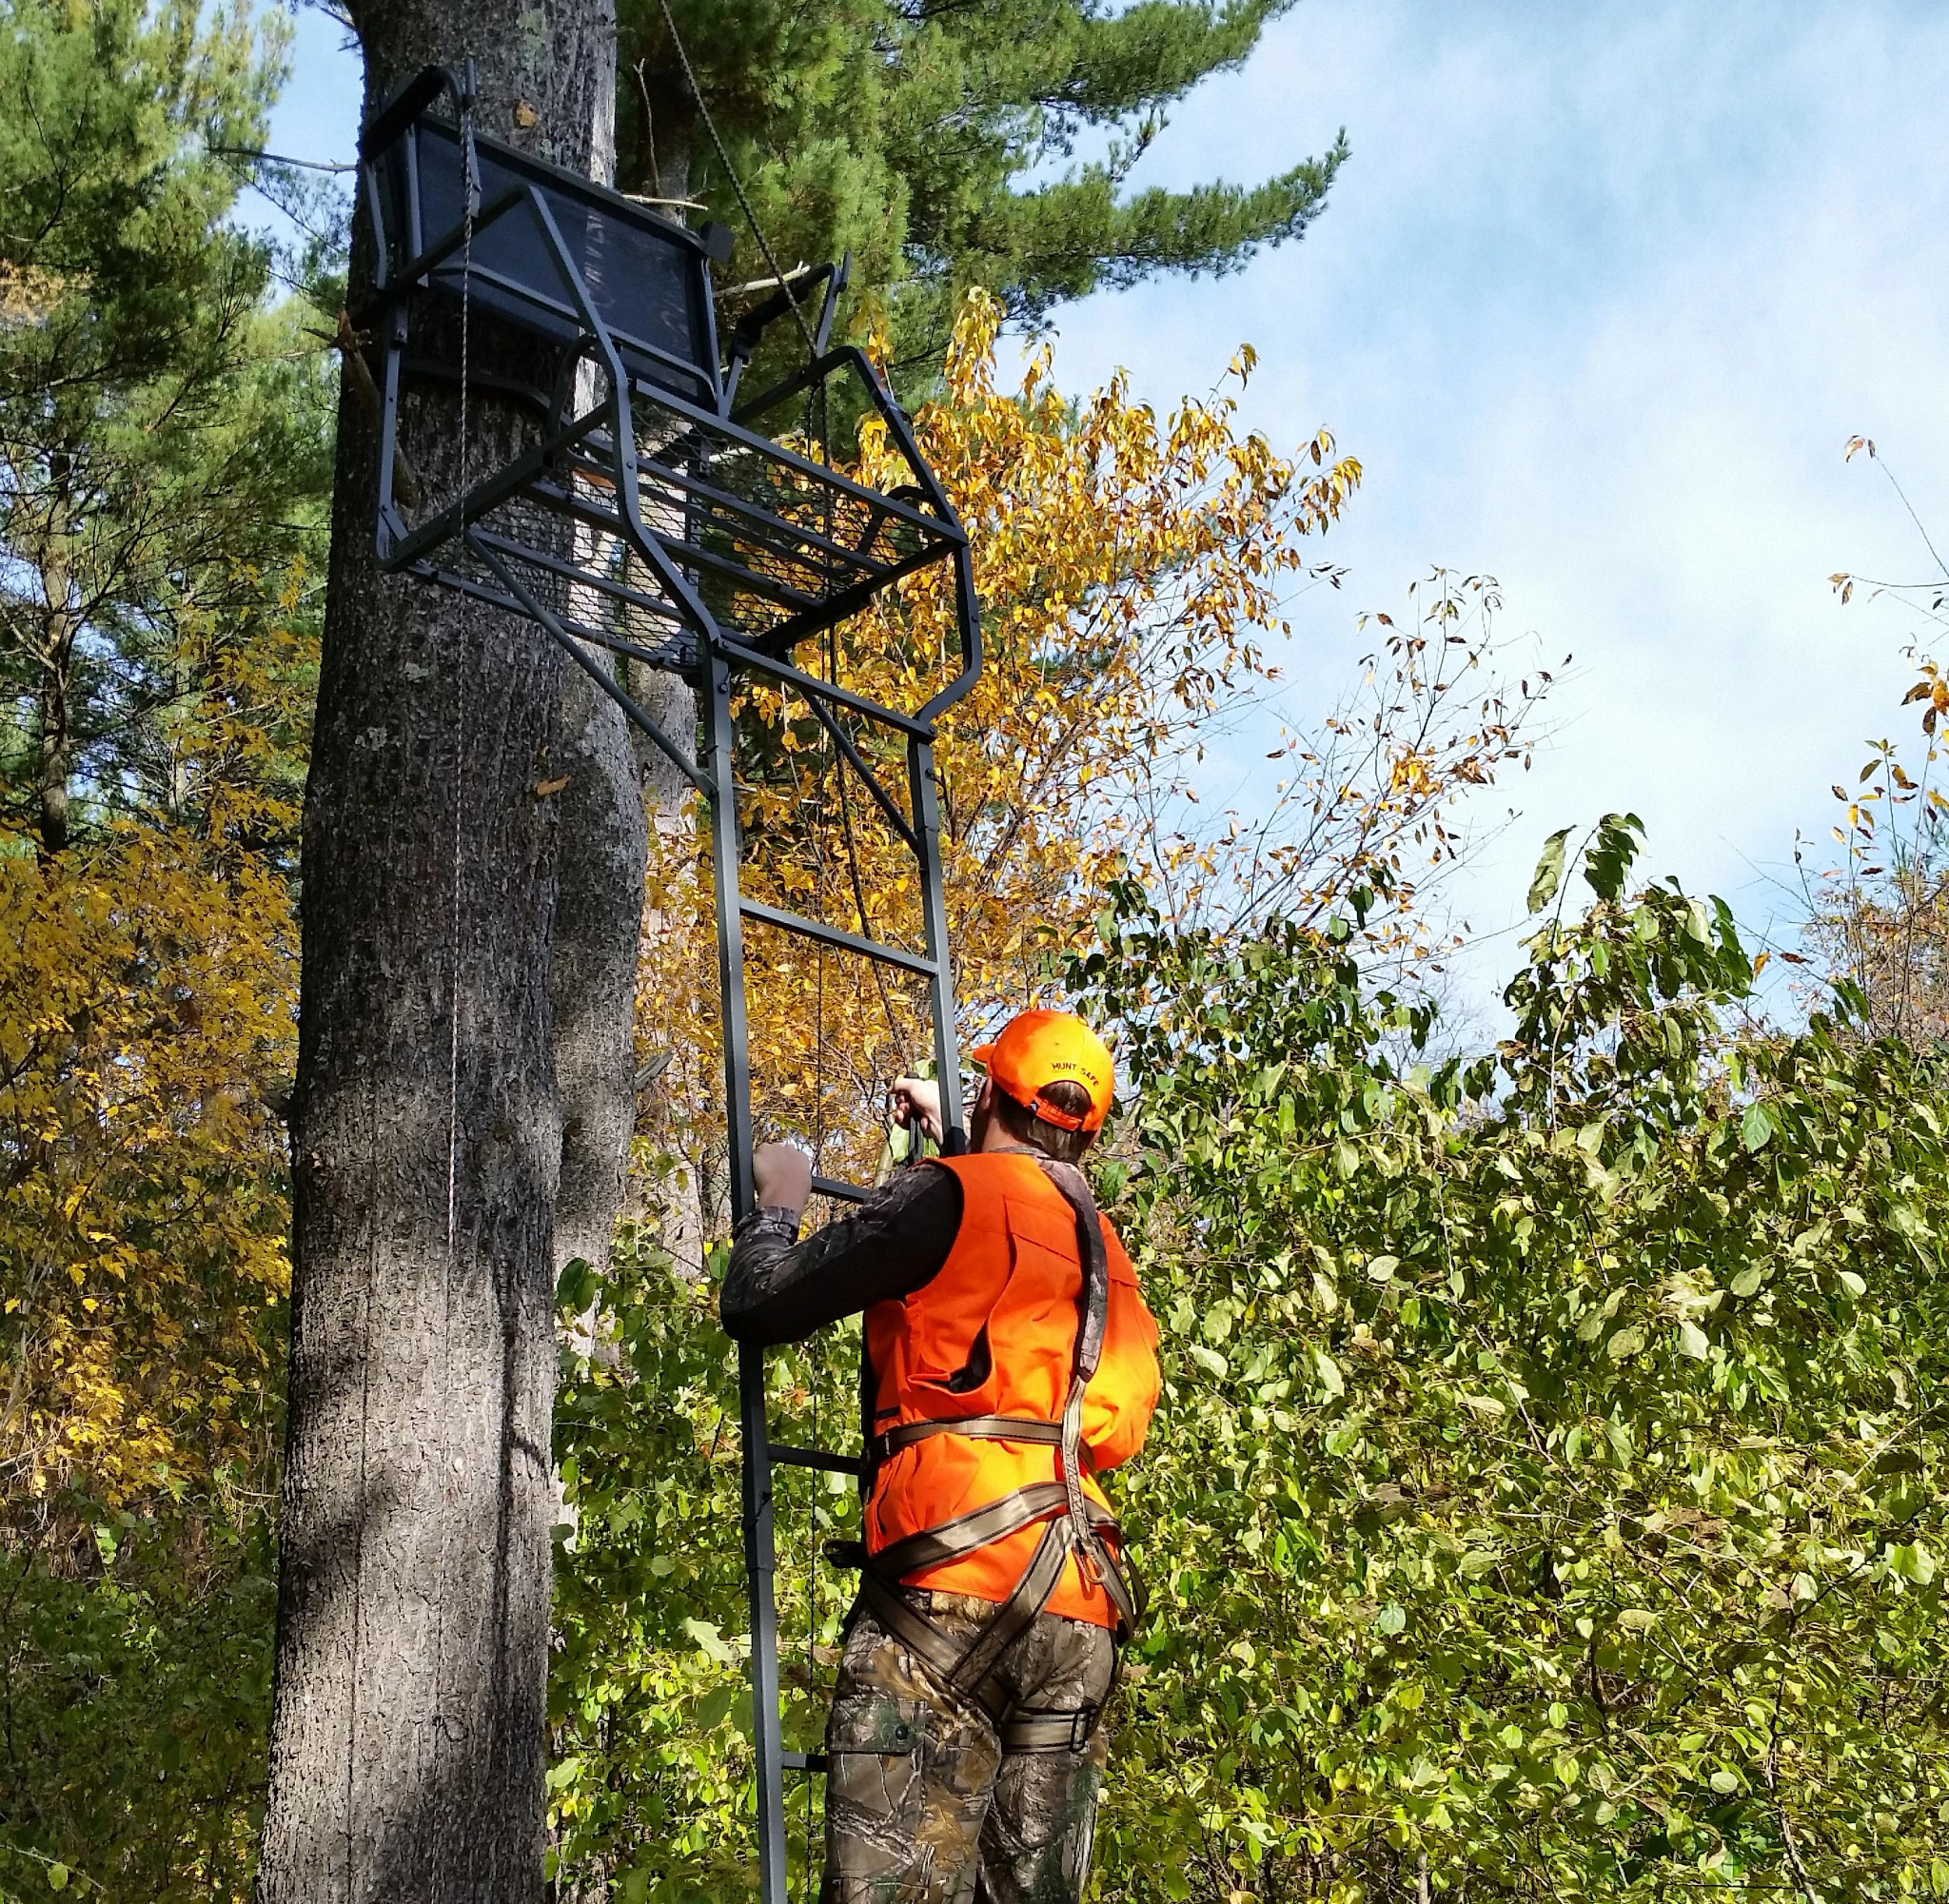 A hunter wearing camo and blaze orange climbs up to a treestand while using a harness.